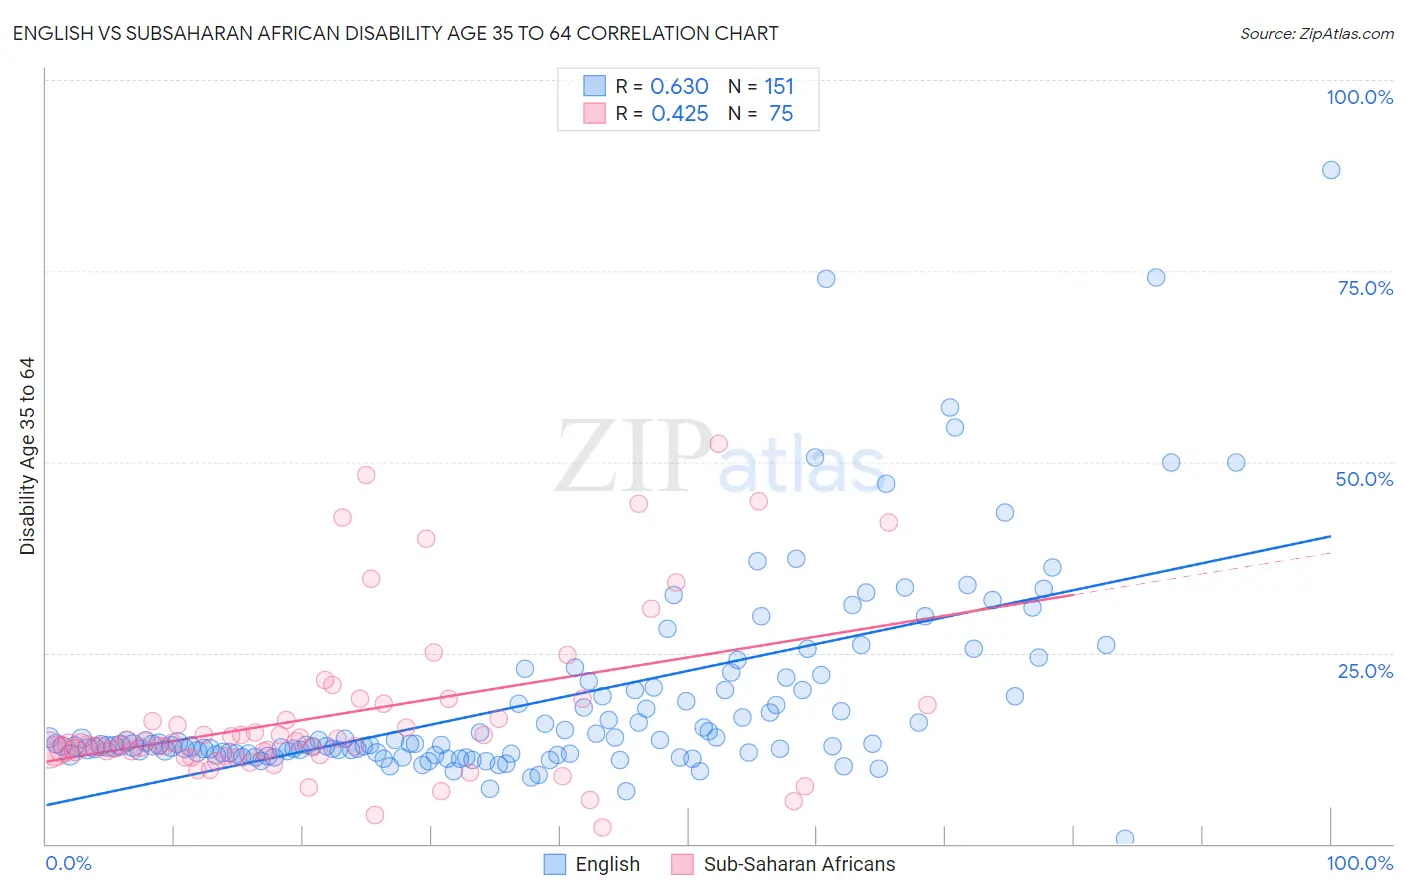 English vs Subsaharan African Disability Age 35 to 64